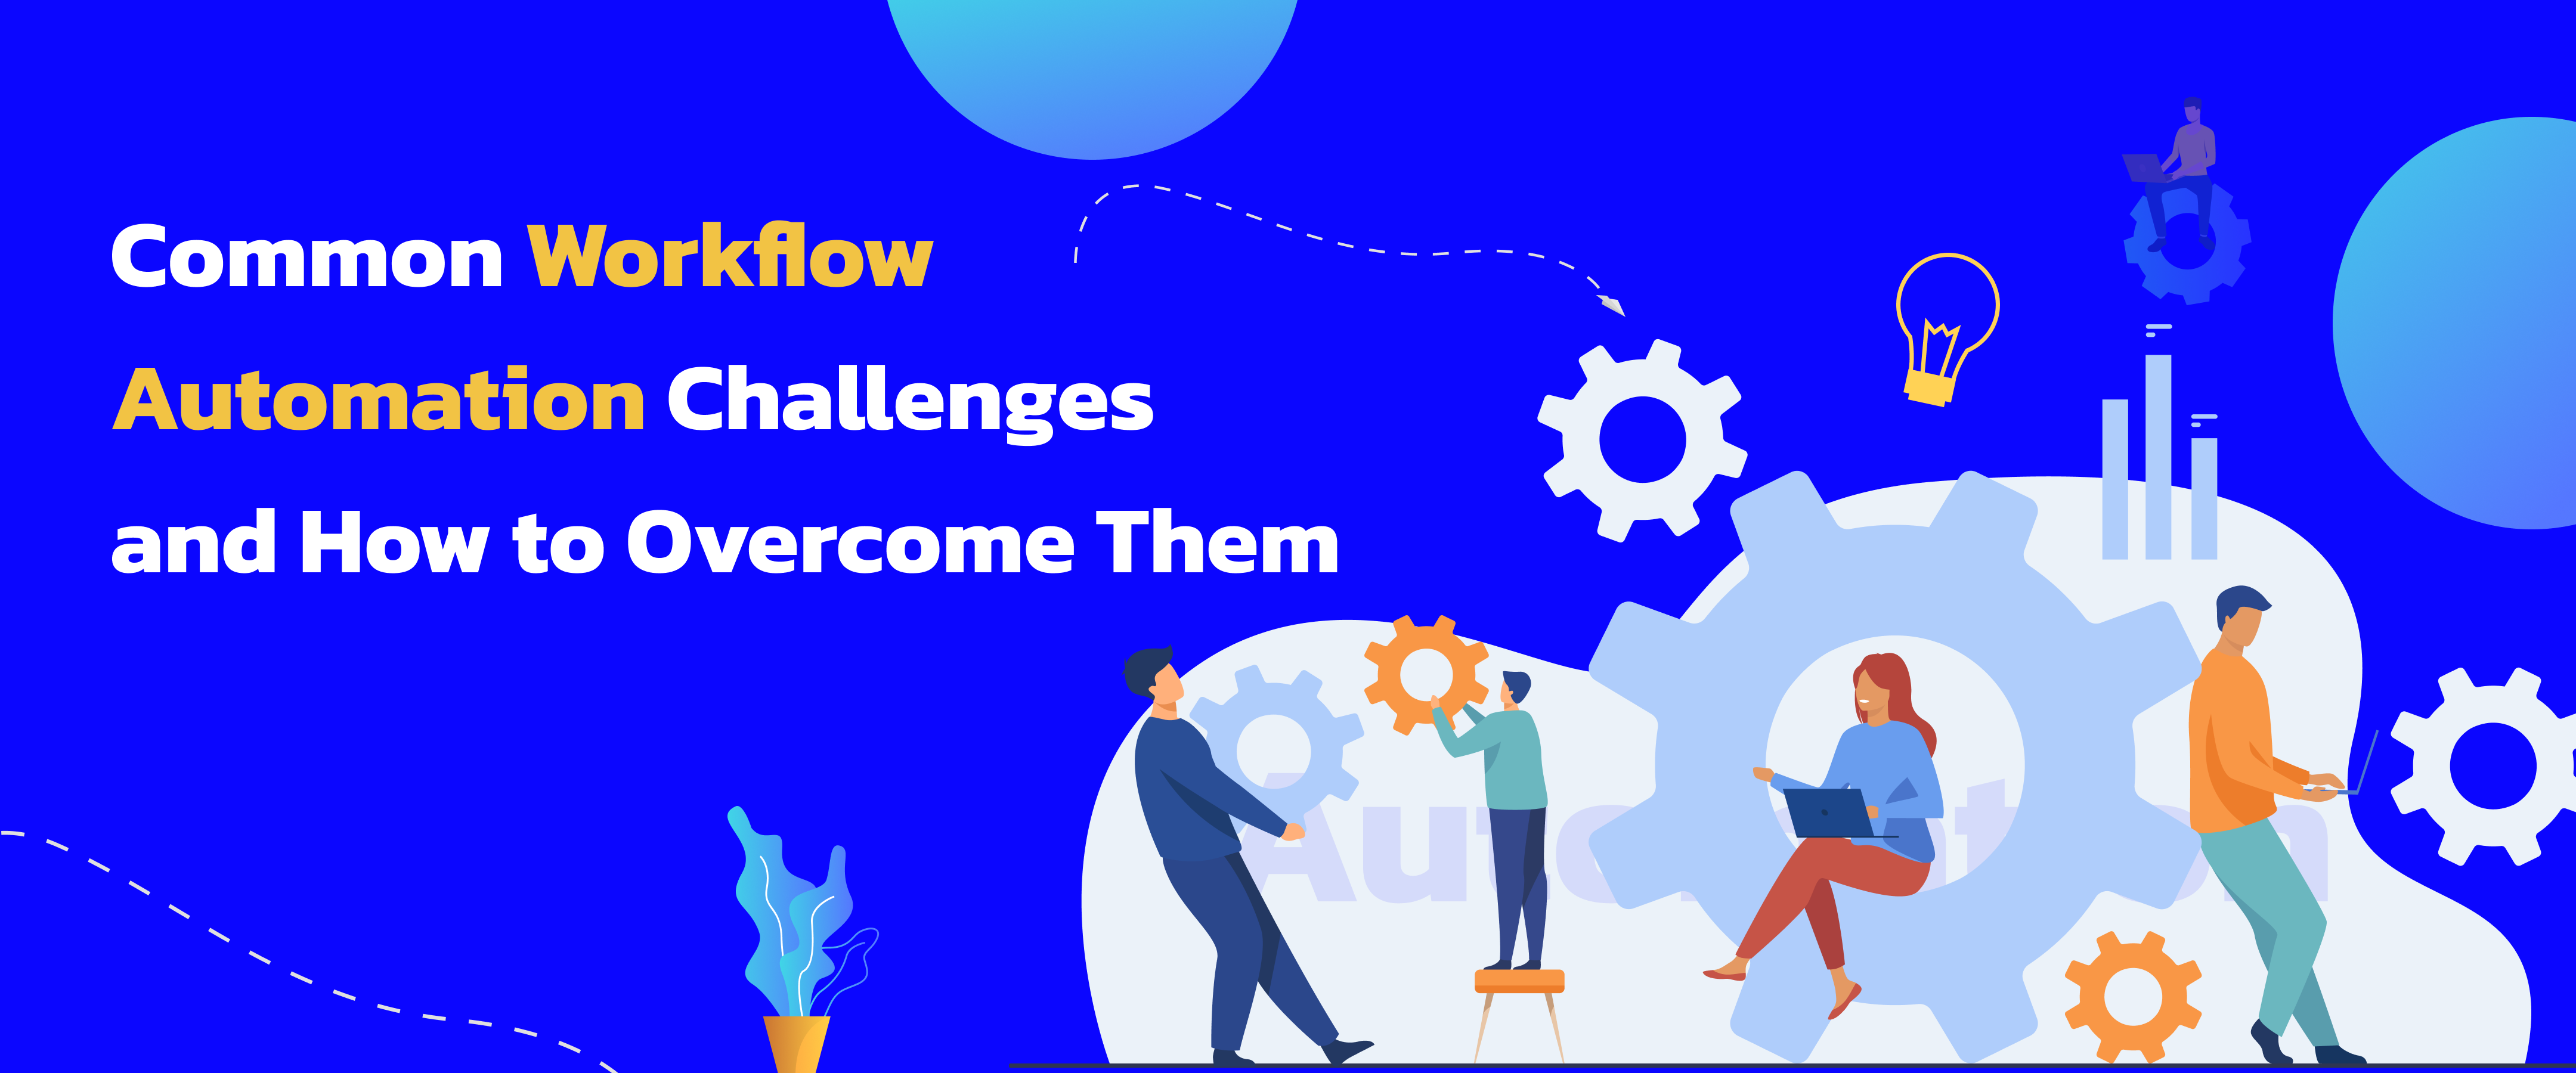 What Are Common Workflow Automation Challenges & How to Overcome Them?